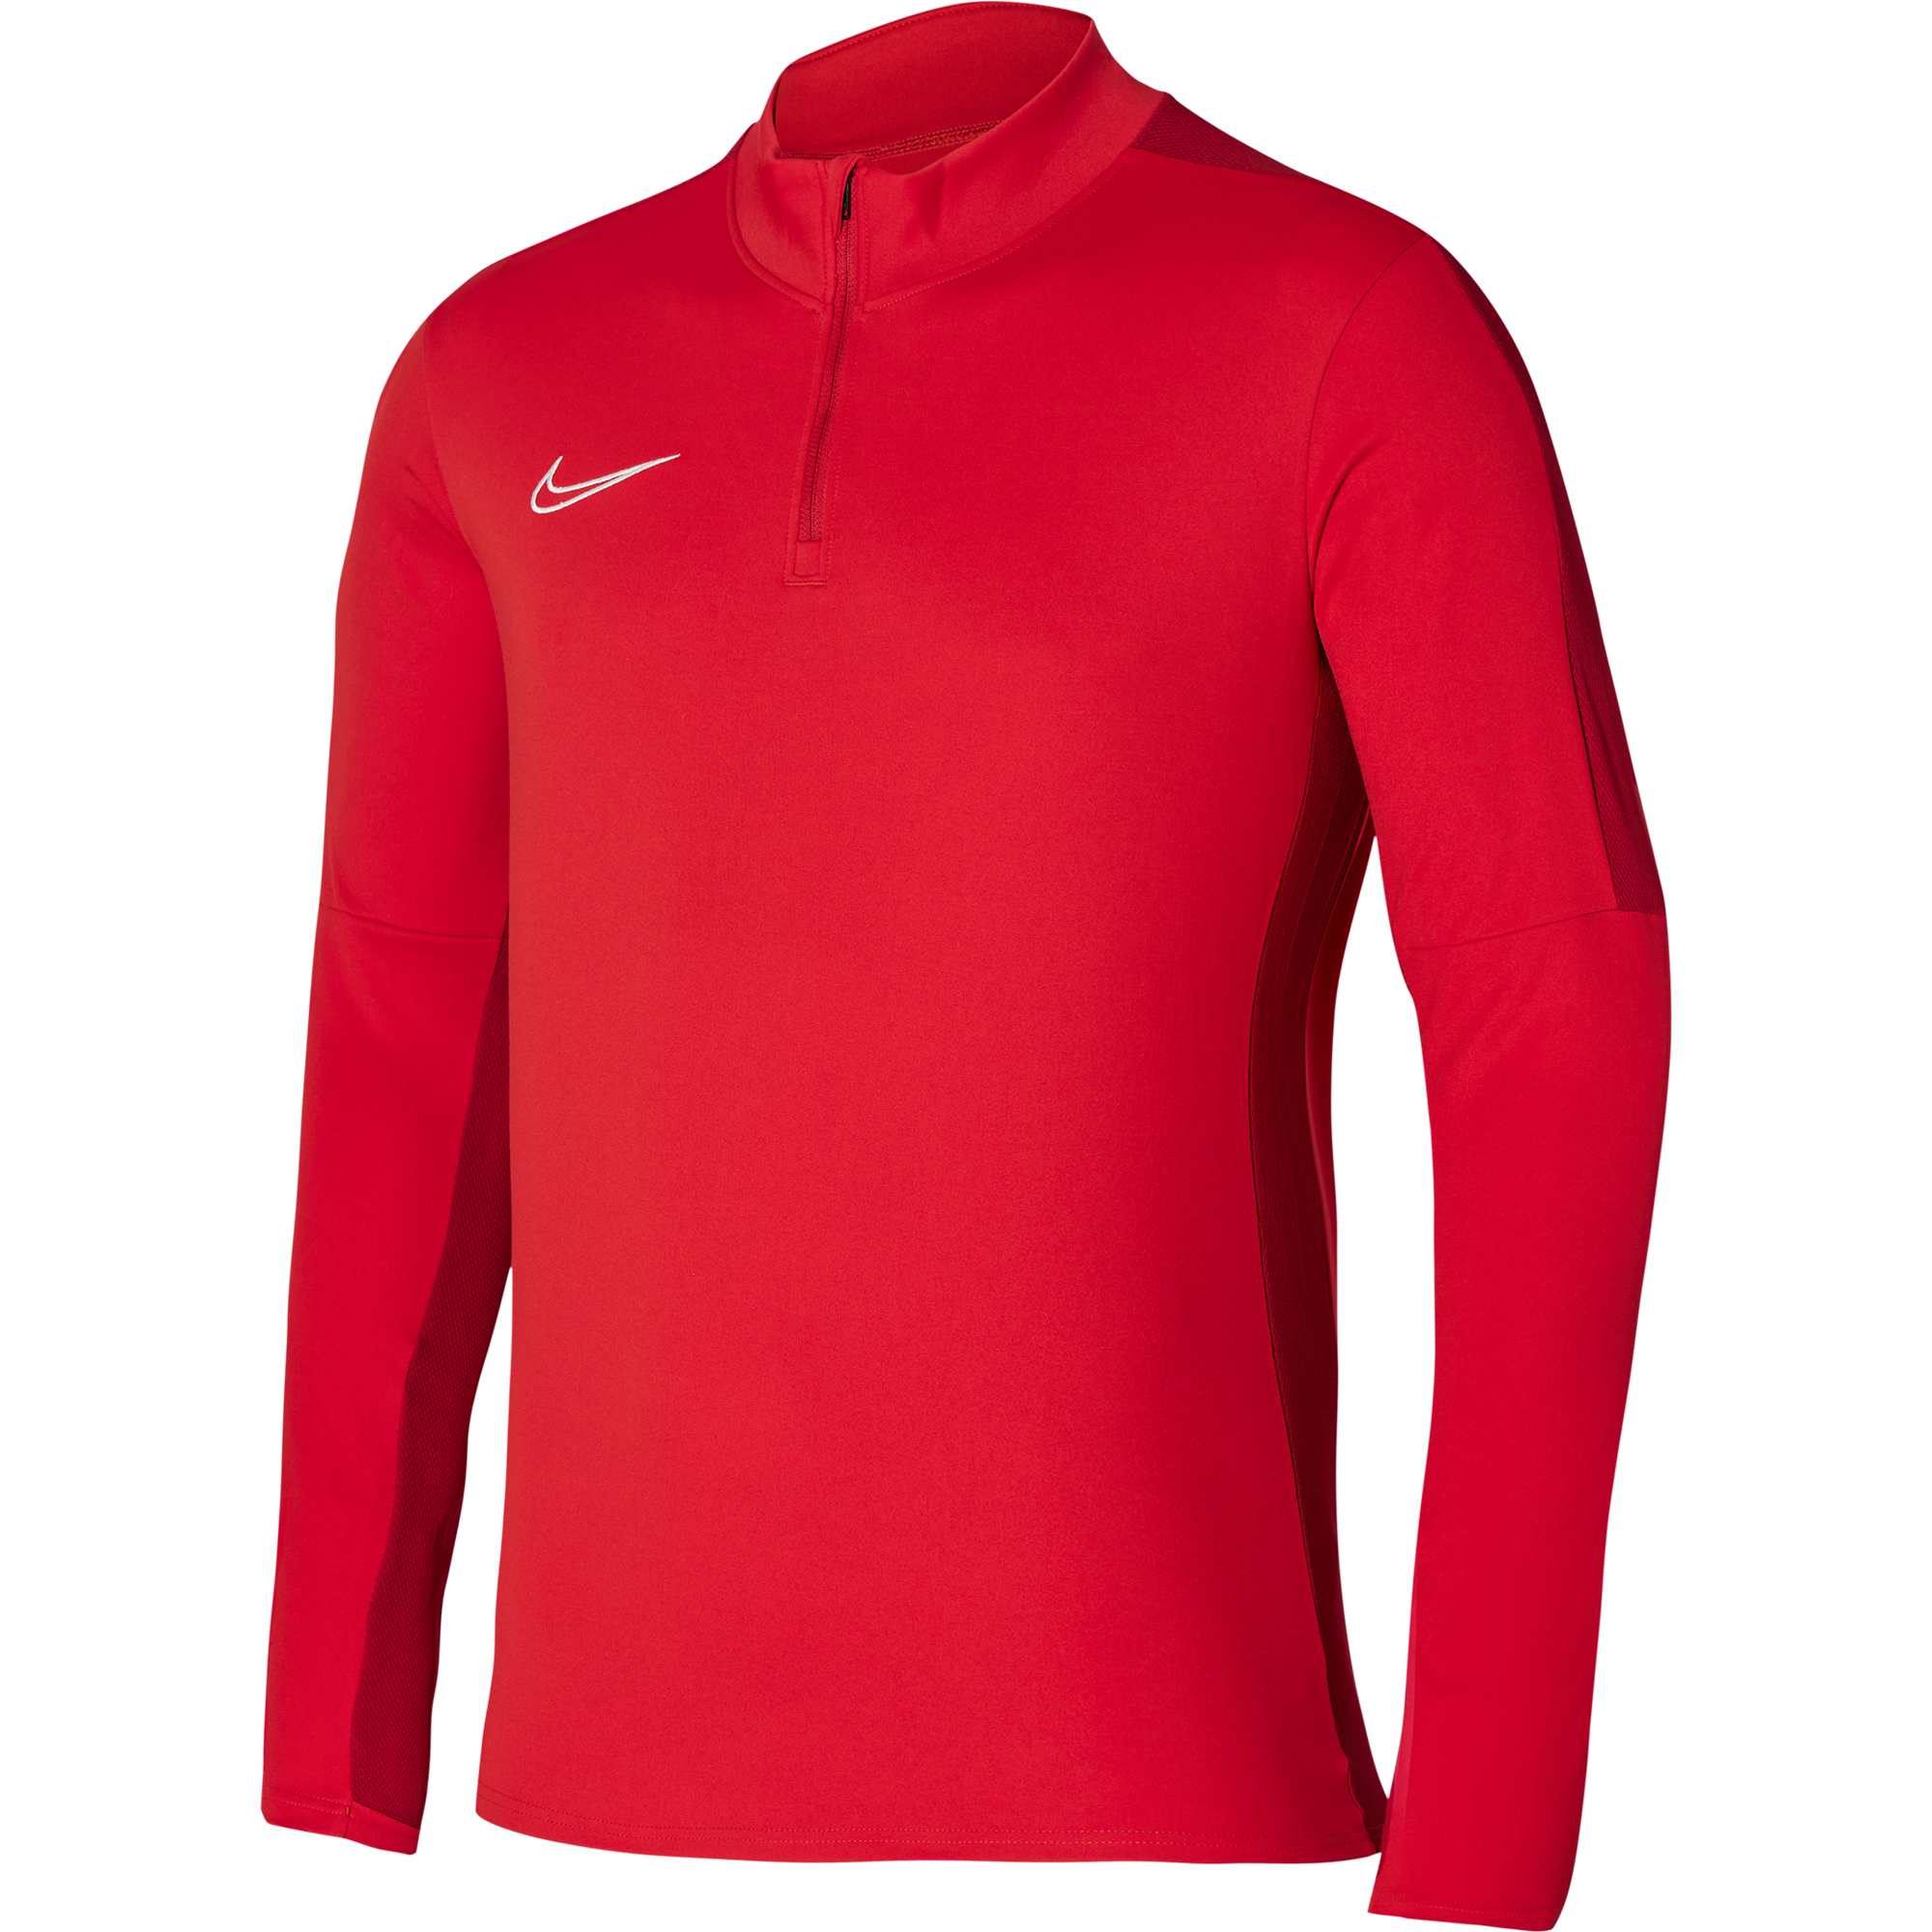 Academy 23 Drill Top (Youth)